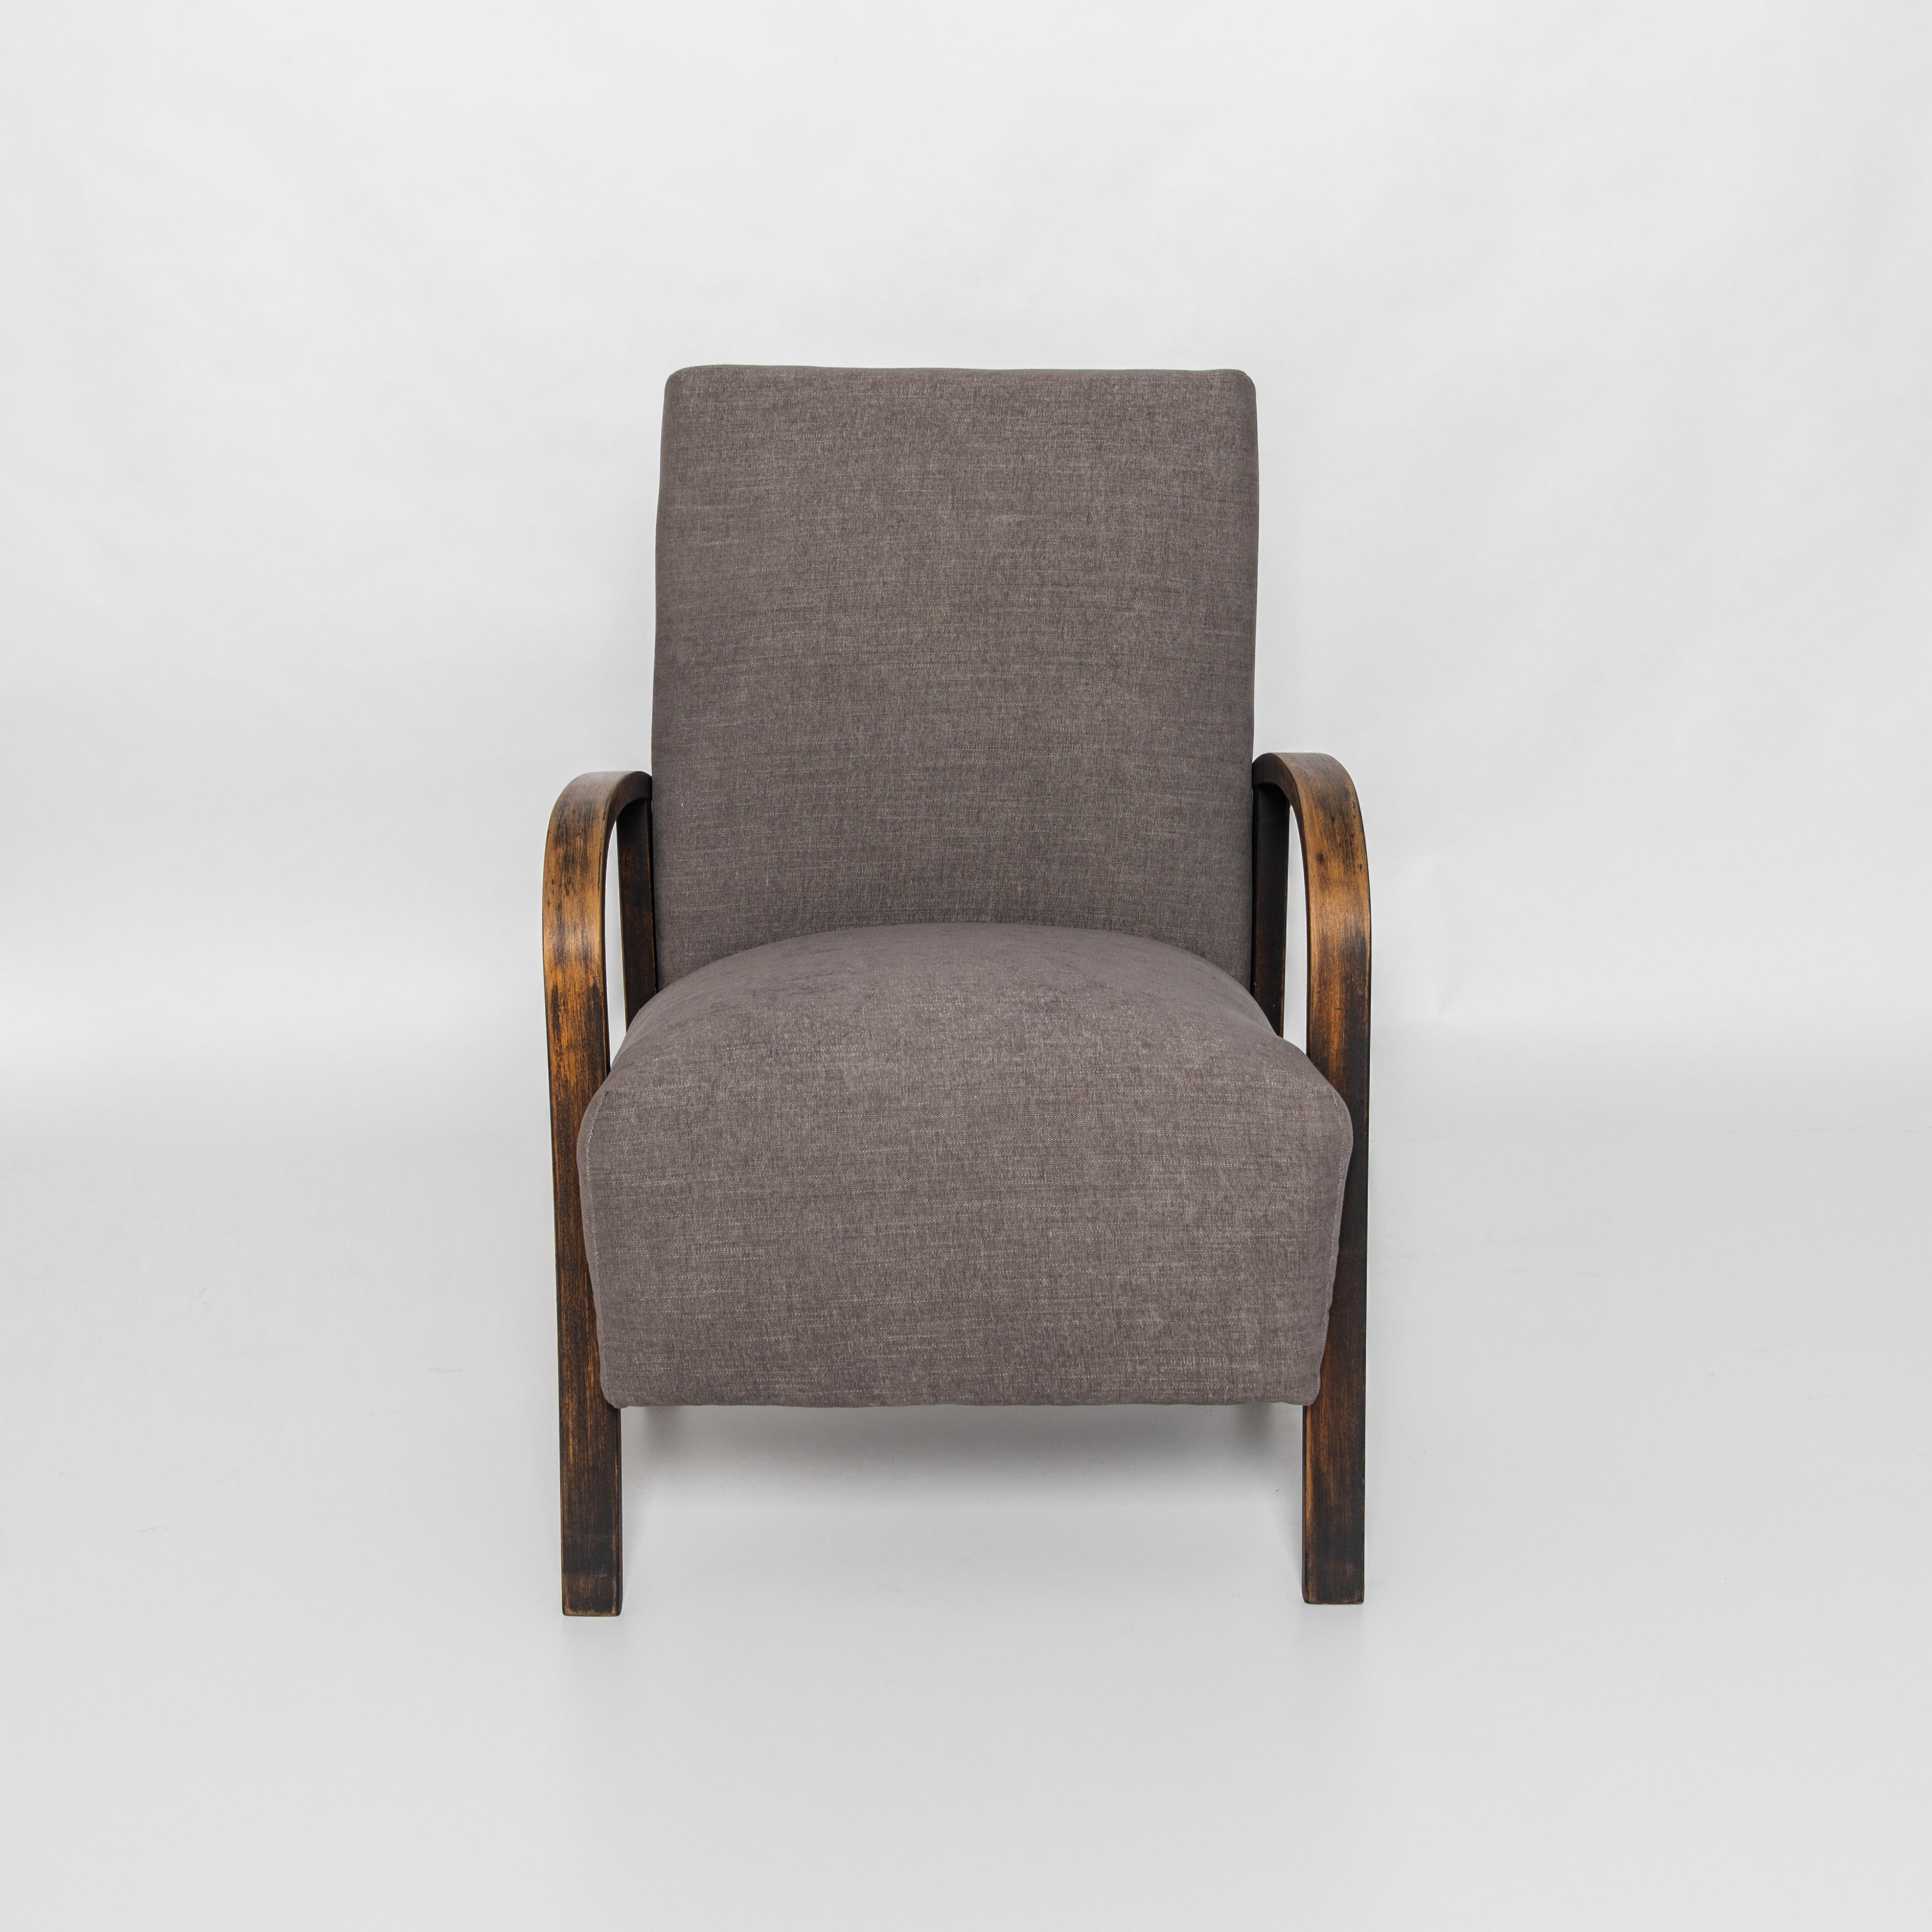 A Modernist inspired armchair from Czech Republic, circa 1960. A timeless approach that still looks contemporary and fresh. In the style of Jindřich Halabala with bent beech armrests and geometric legs, re-upholstered with a grey cotton-linen blend.